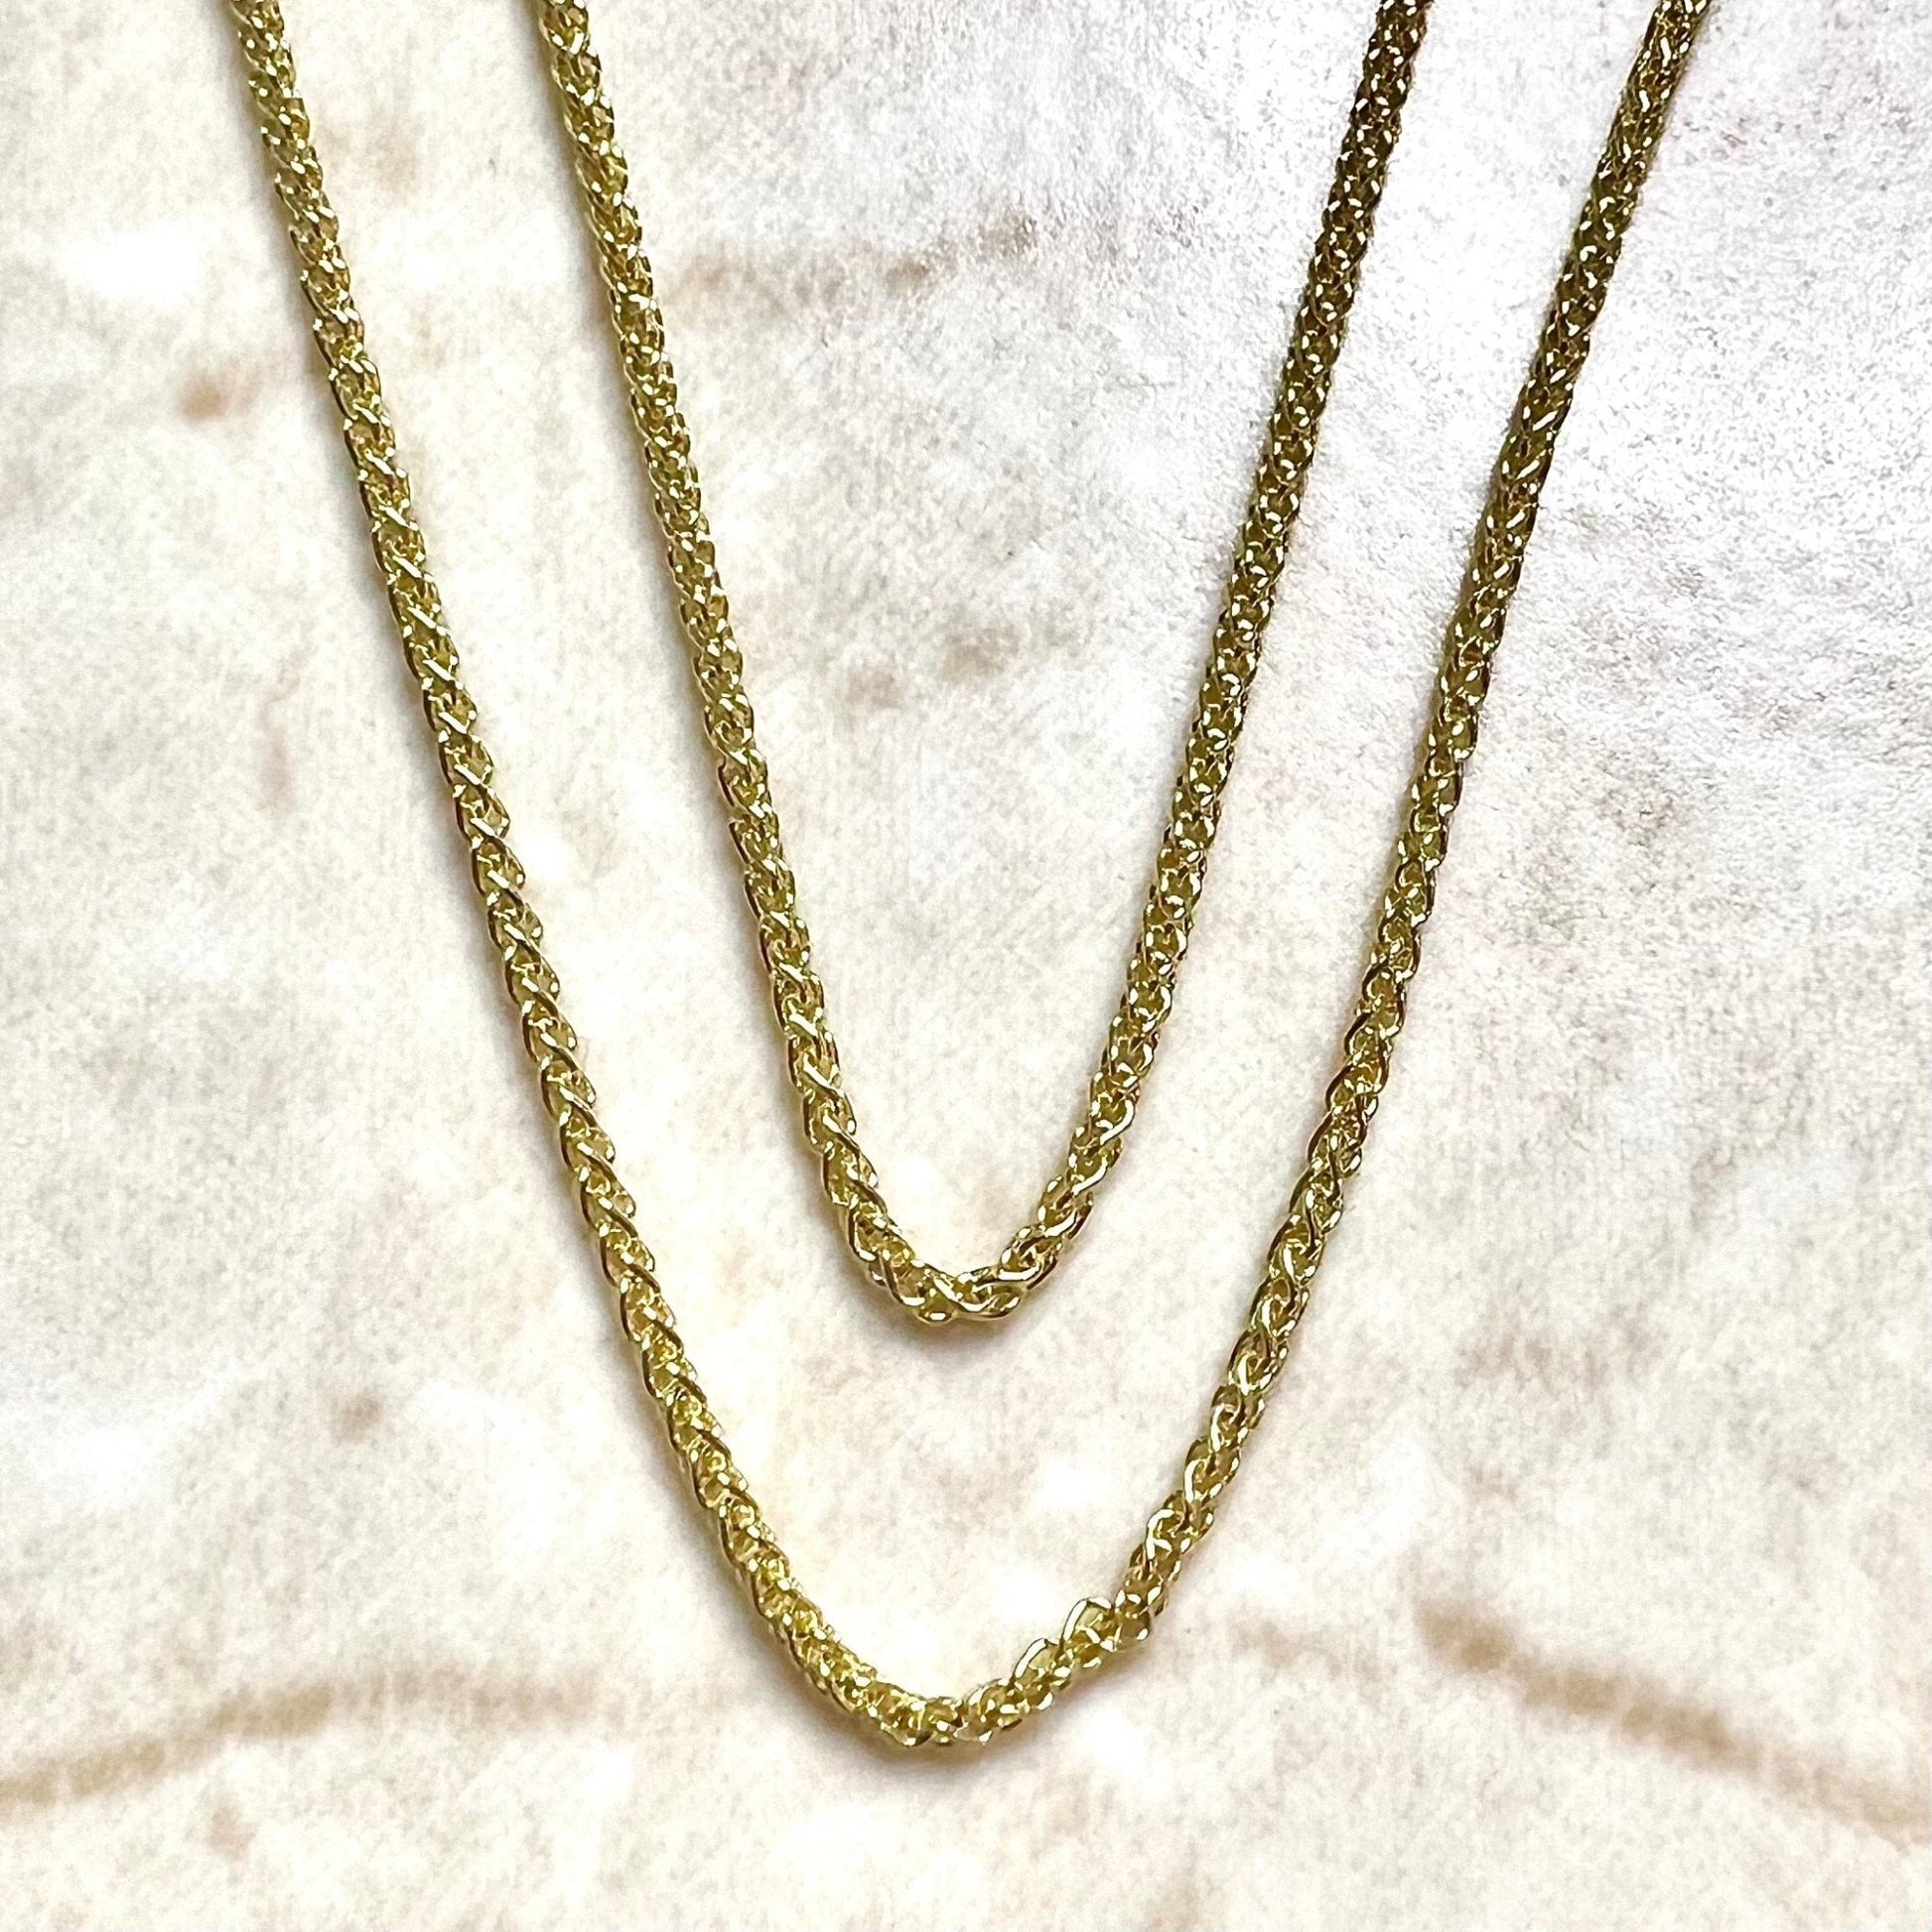 Solid Chain Necklace 14K Yellow Gold 18